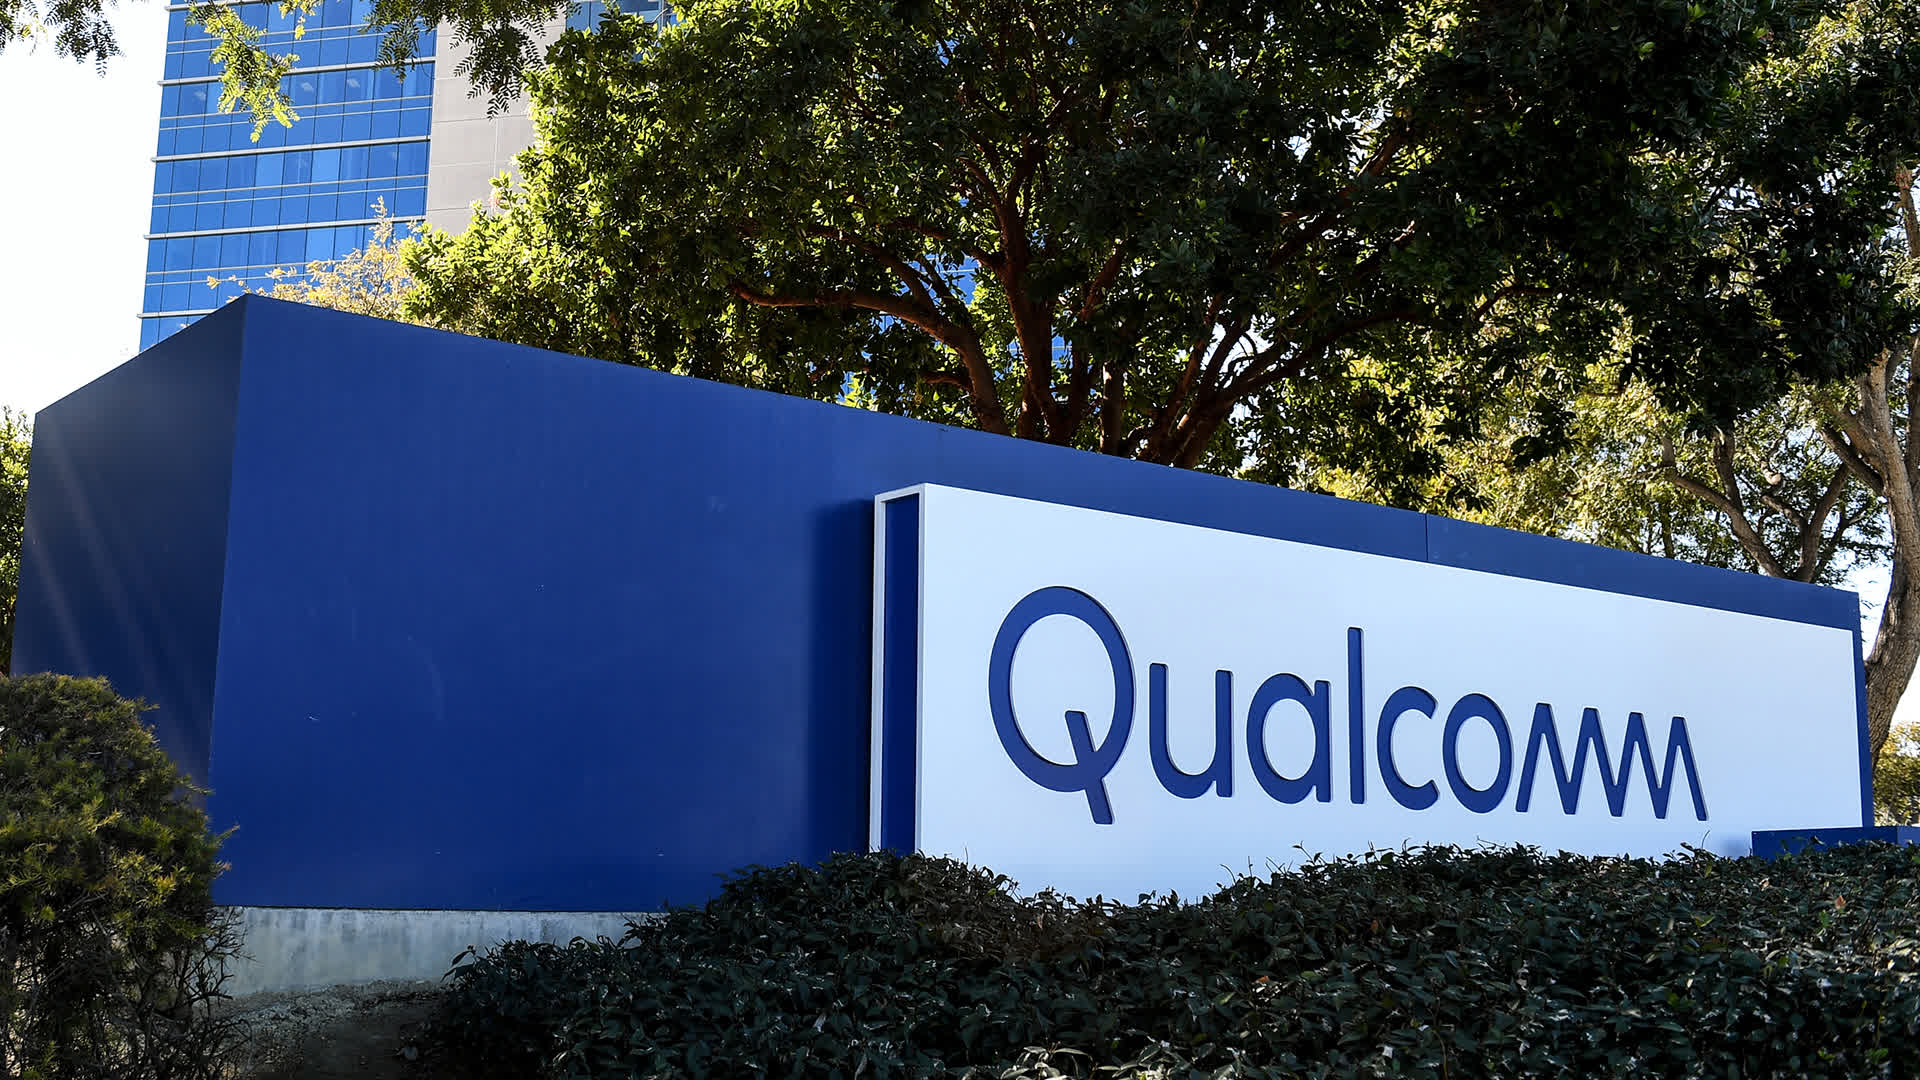 Qualcomm sees opportunity in Huawei's misfortune